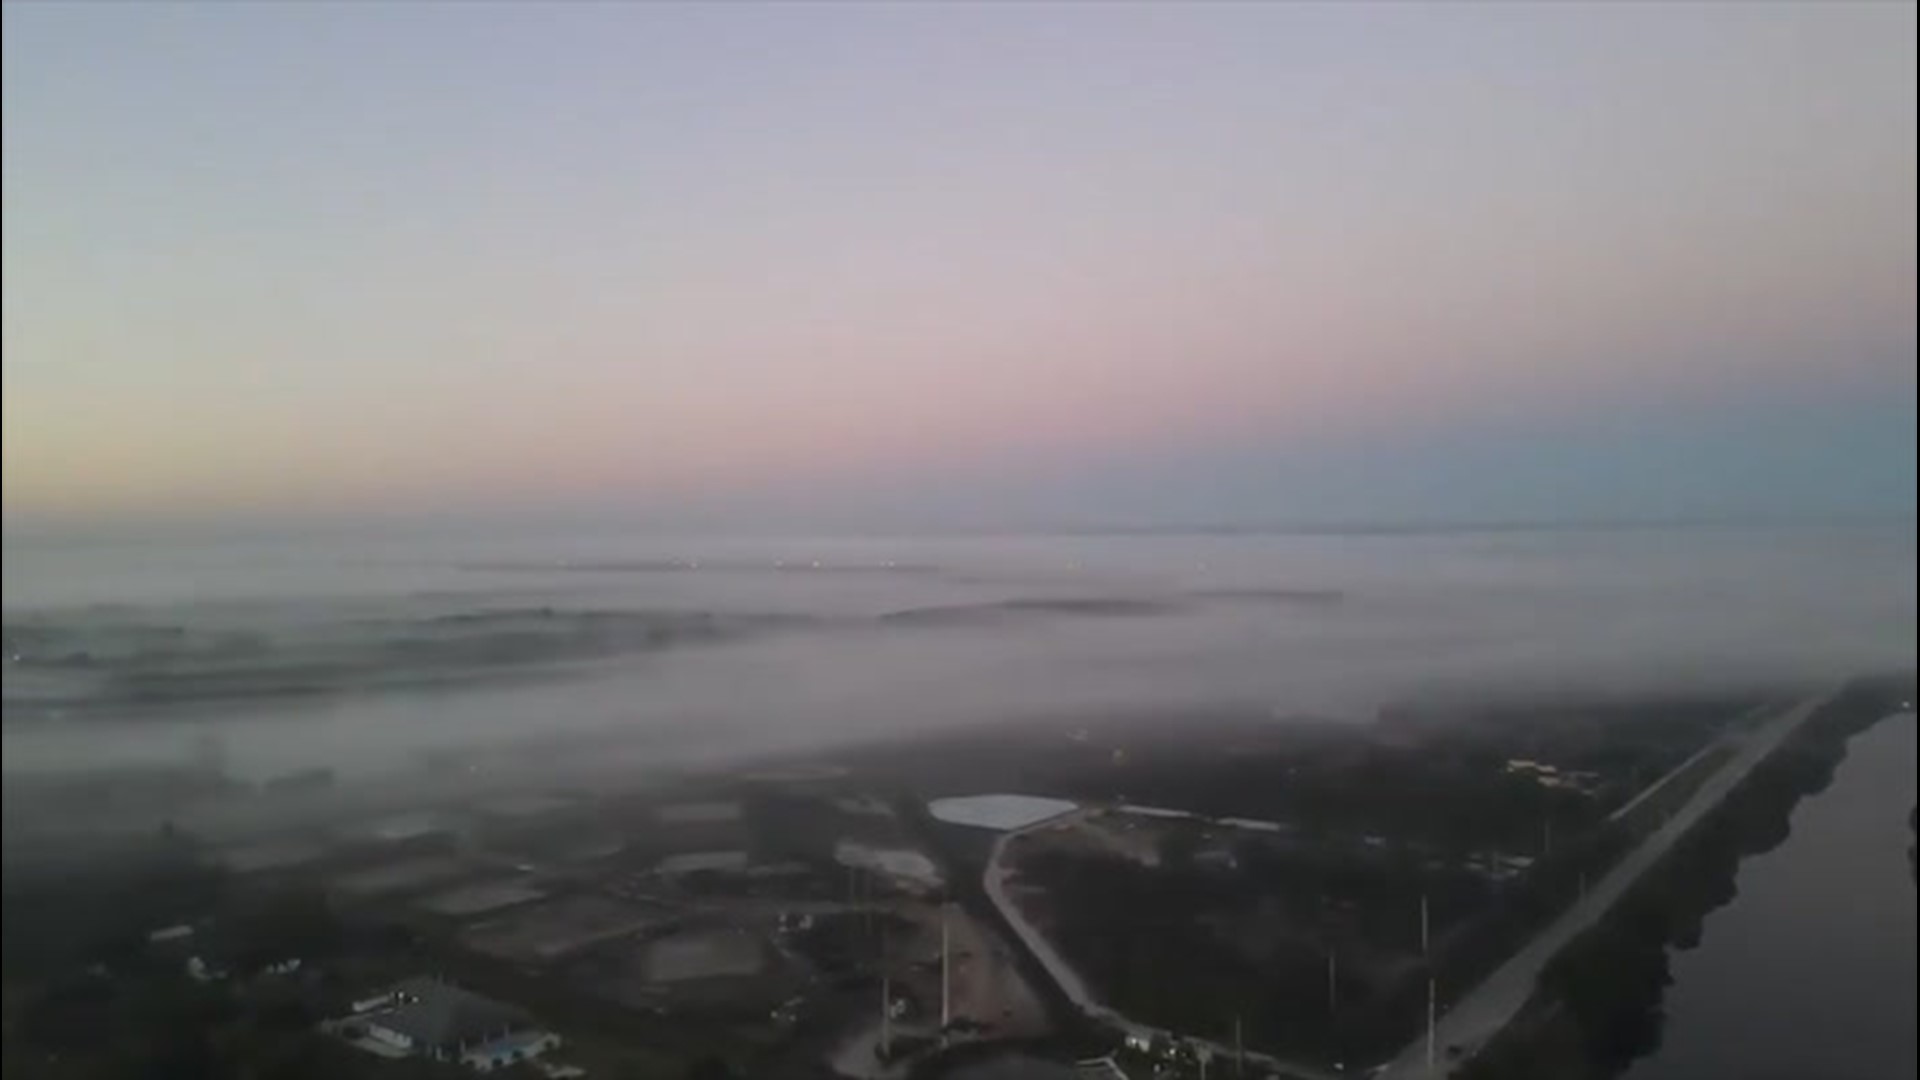 A bird's-eye view of Davie, Florida, on Jan. 23 showed fog nearly covering the city.